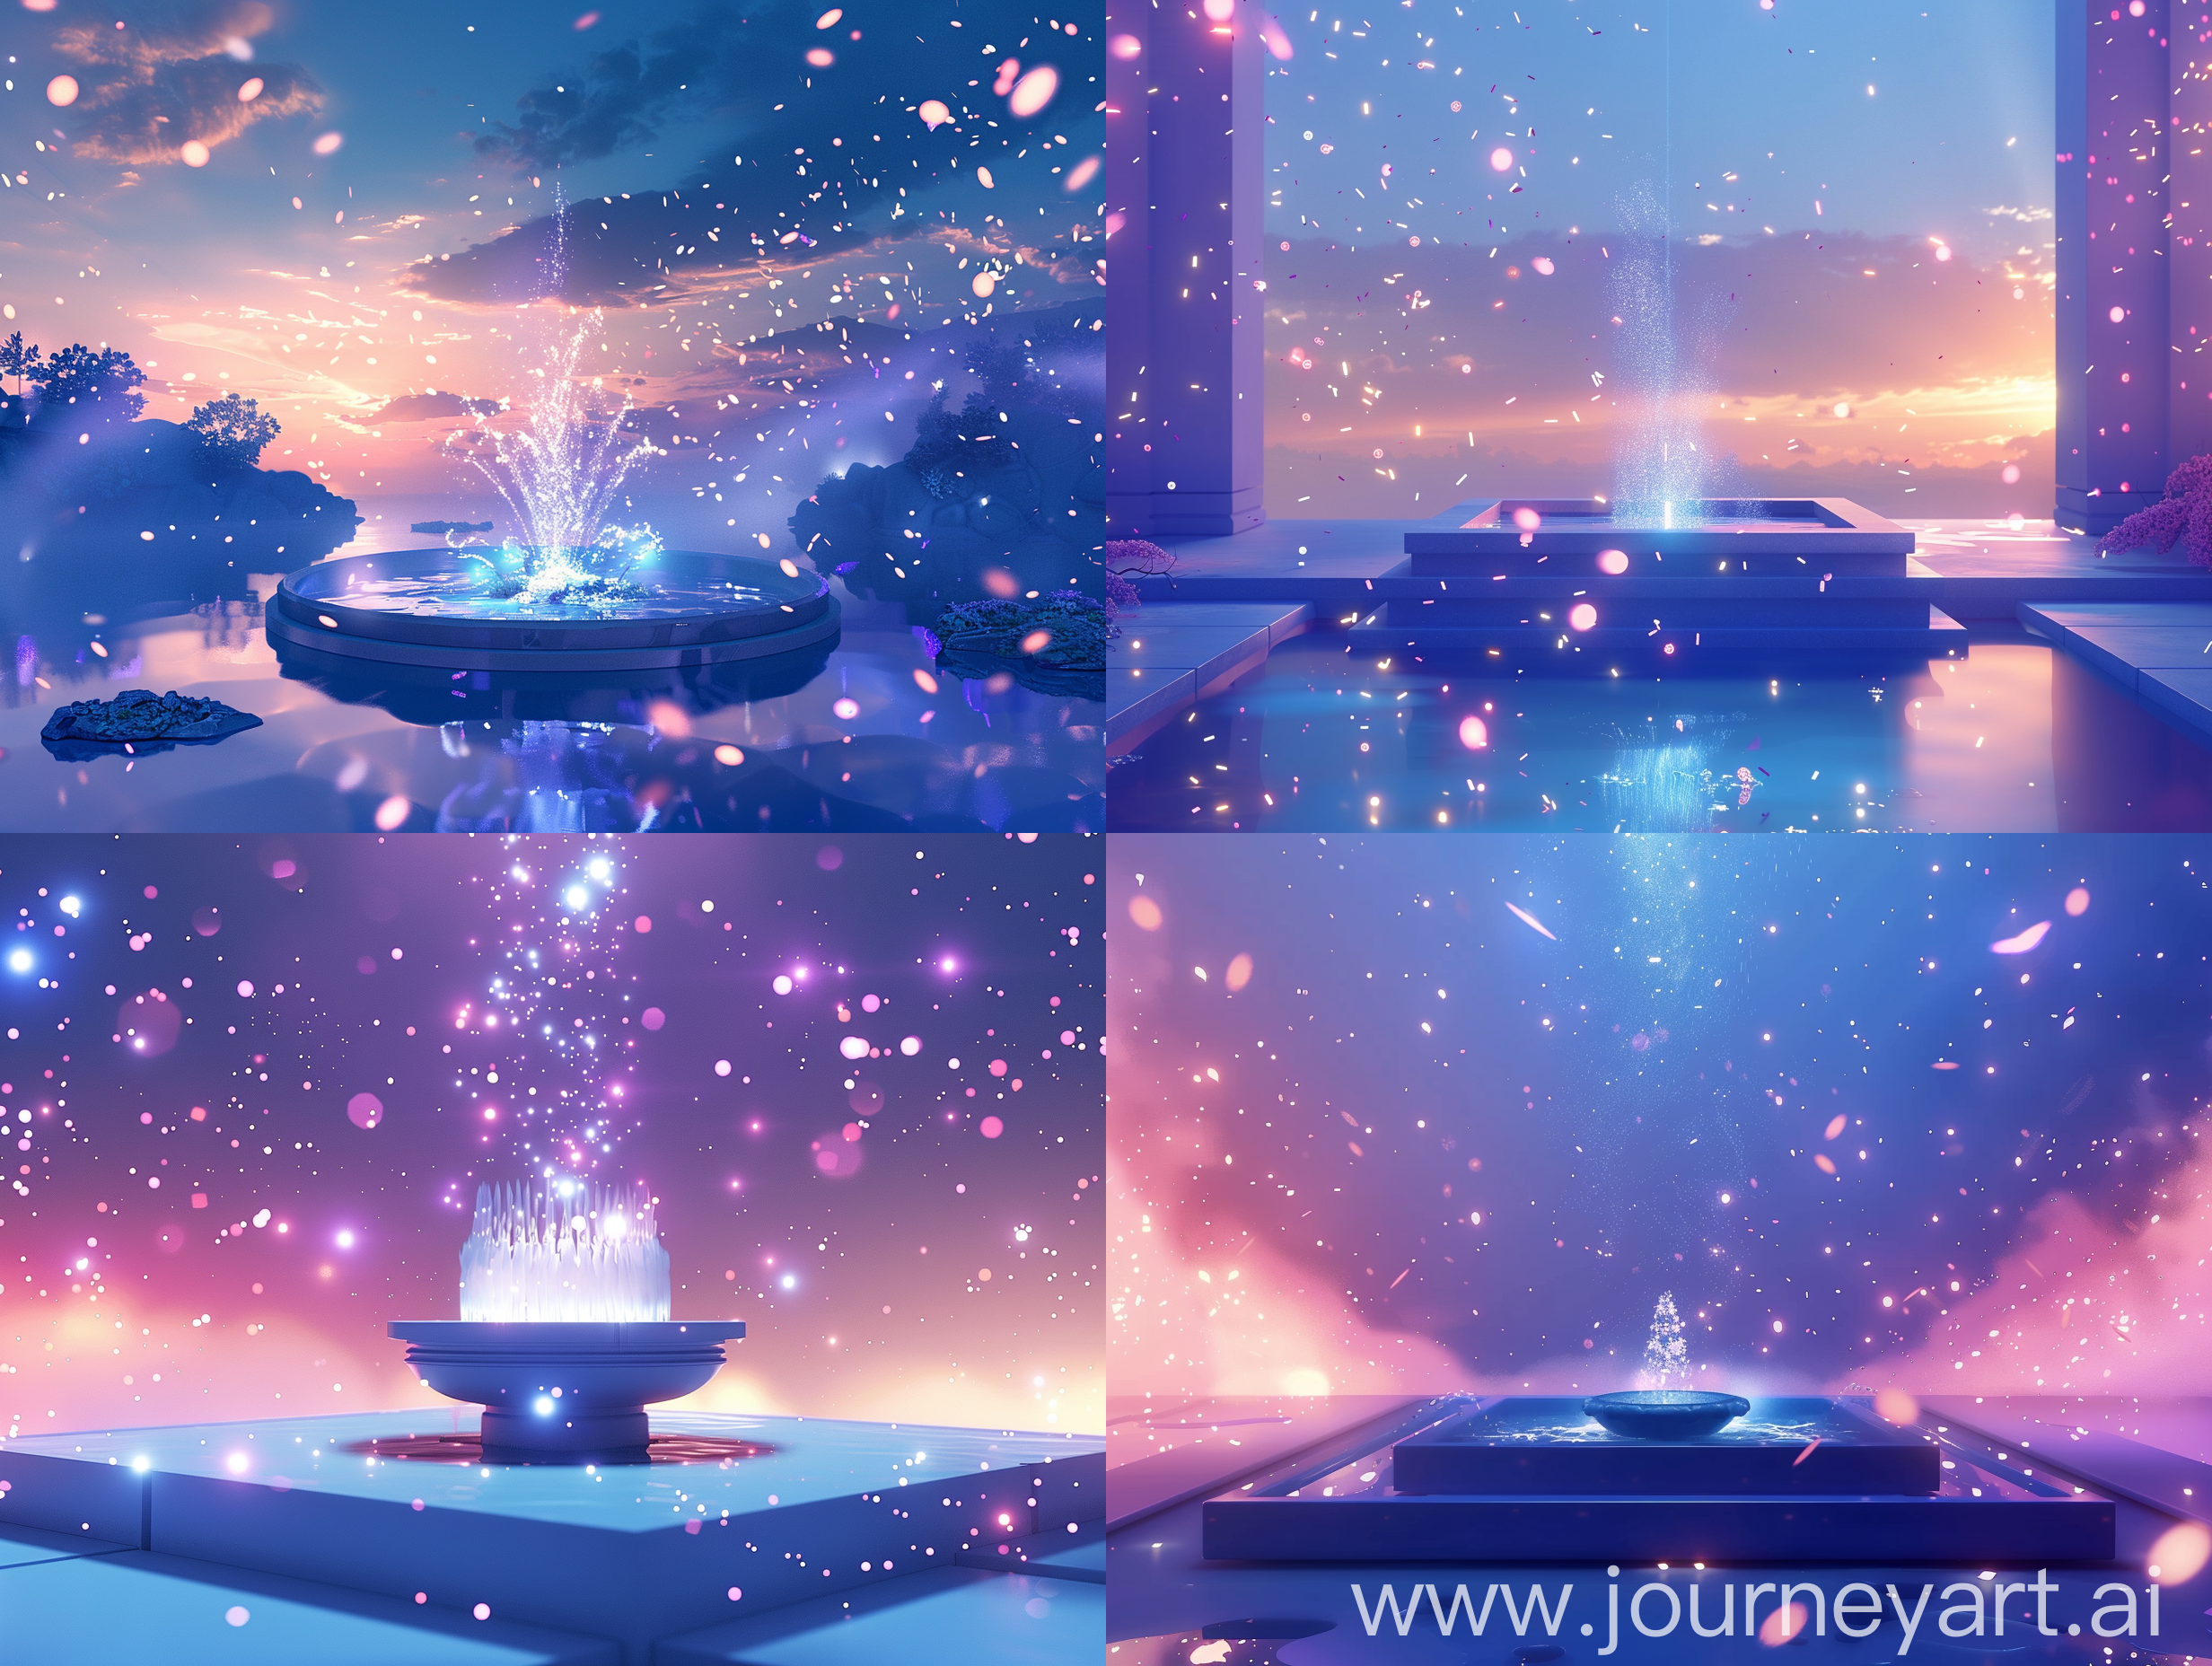 A 3d realistic art of a beautiful minimalistic zen garden with a fountain in the center. Glowing particles are flying around and night turns into dawn. Deep blue, purple, and soft pink colors. Modern look 3d illustration